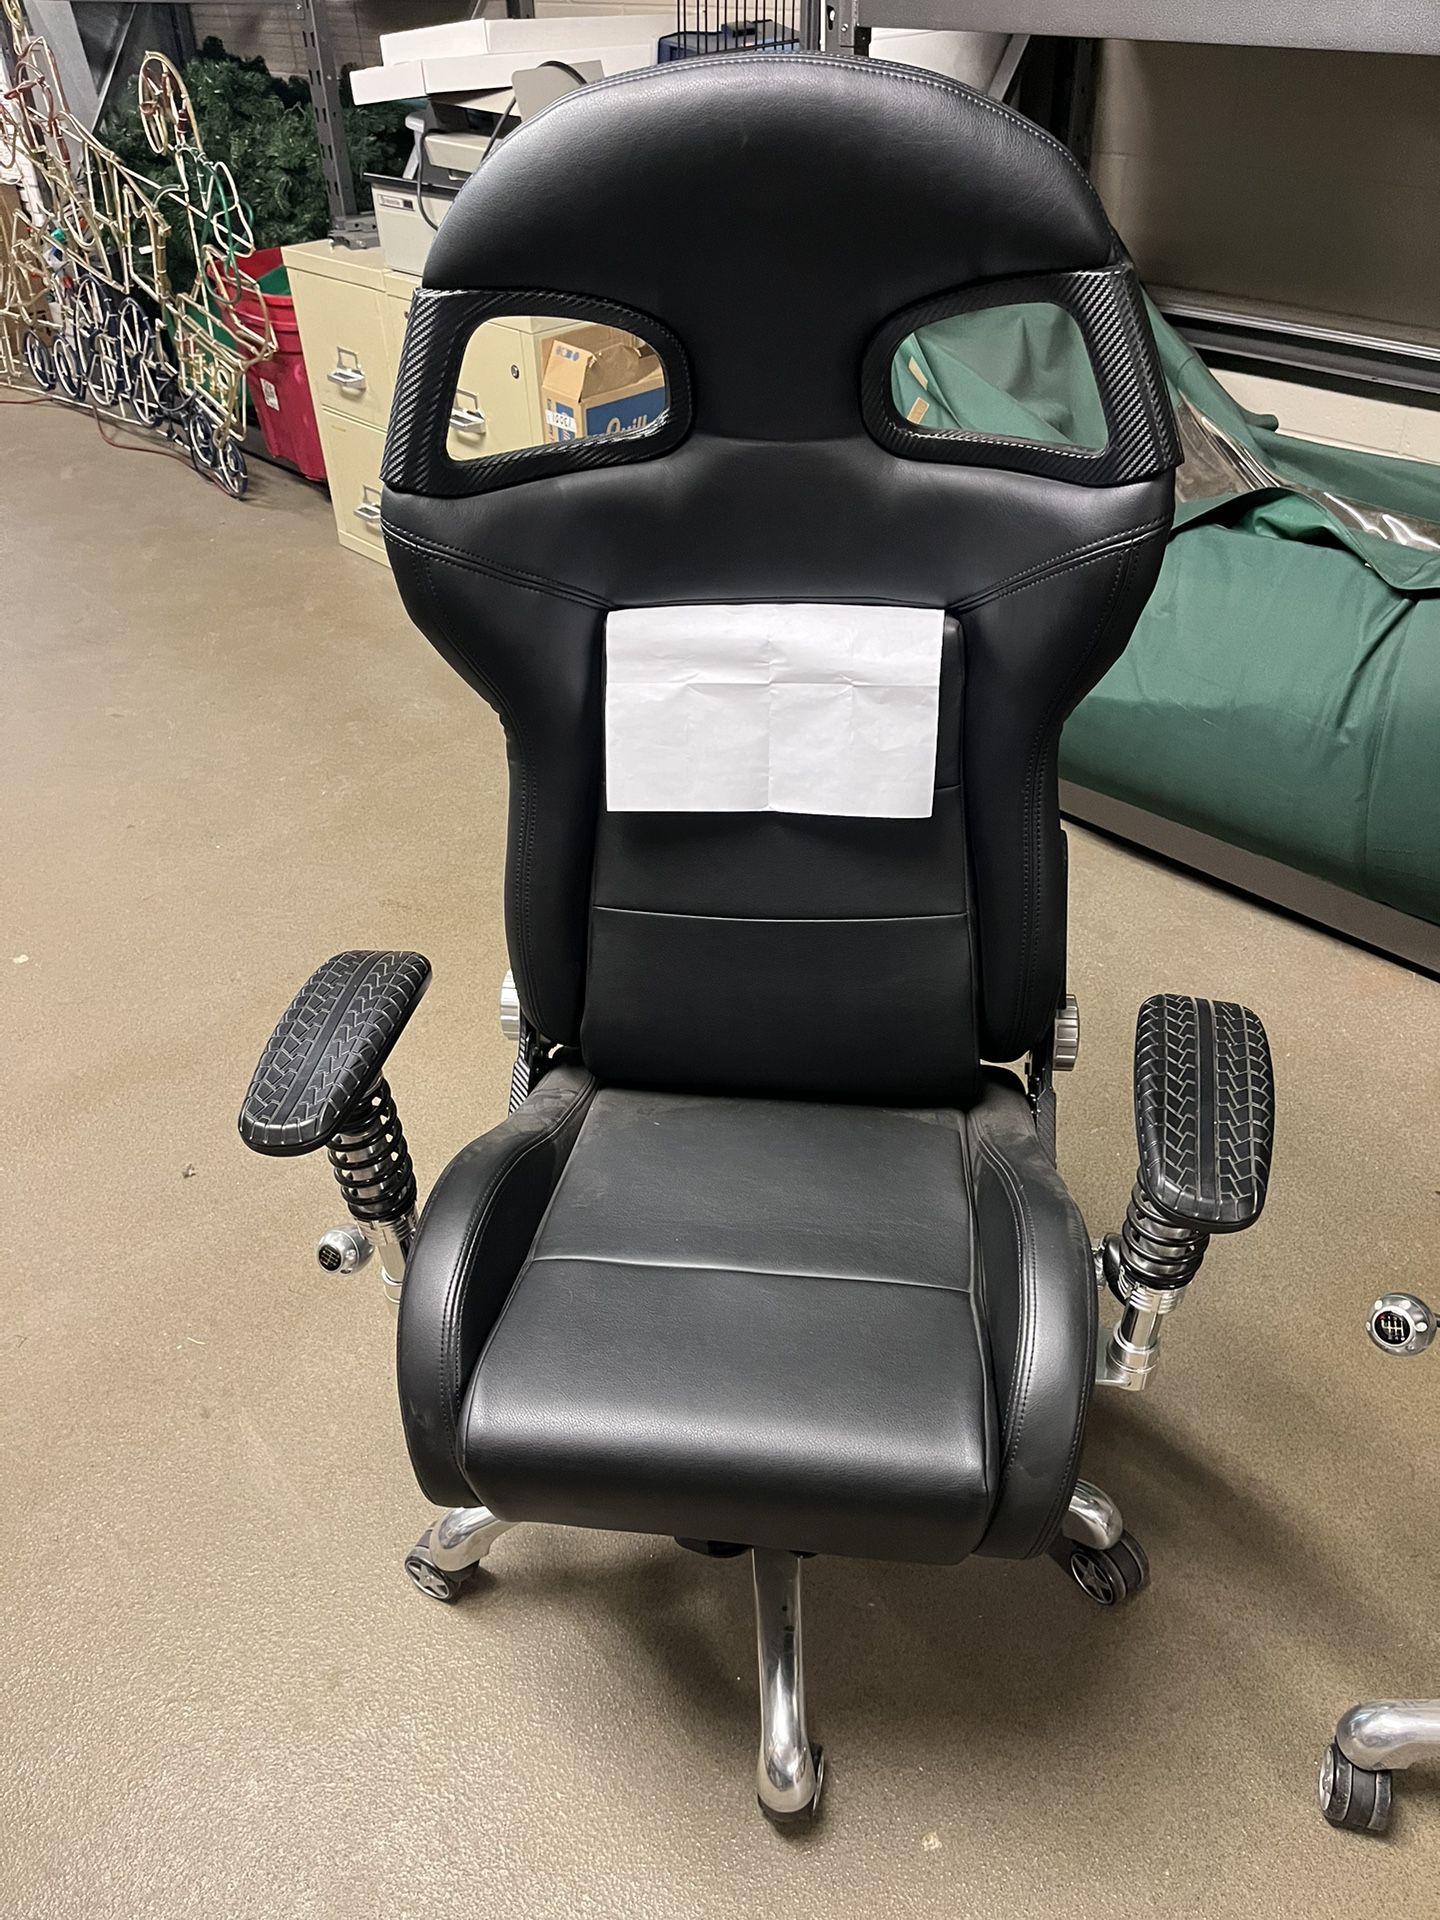 Game Chairs